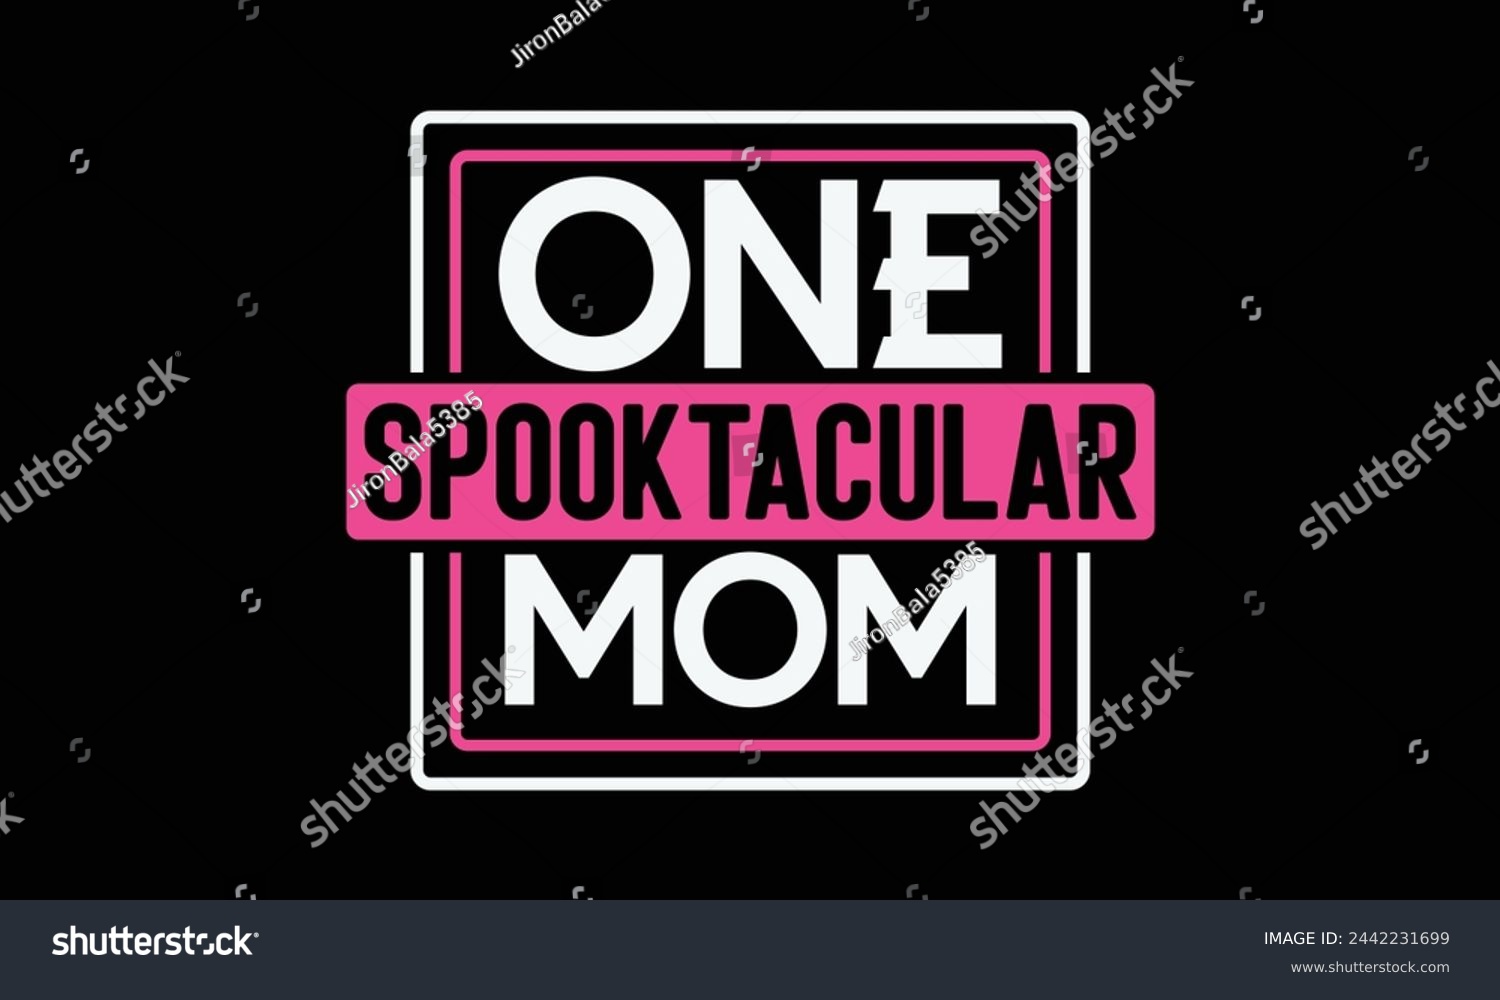 SVG of one spooktacular mom - Mom t-shirt design, isolated on white background, this illustration can be used as a print on t-shirts and bags, cover book, template, stationary or as a poster. svg